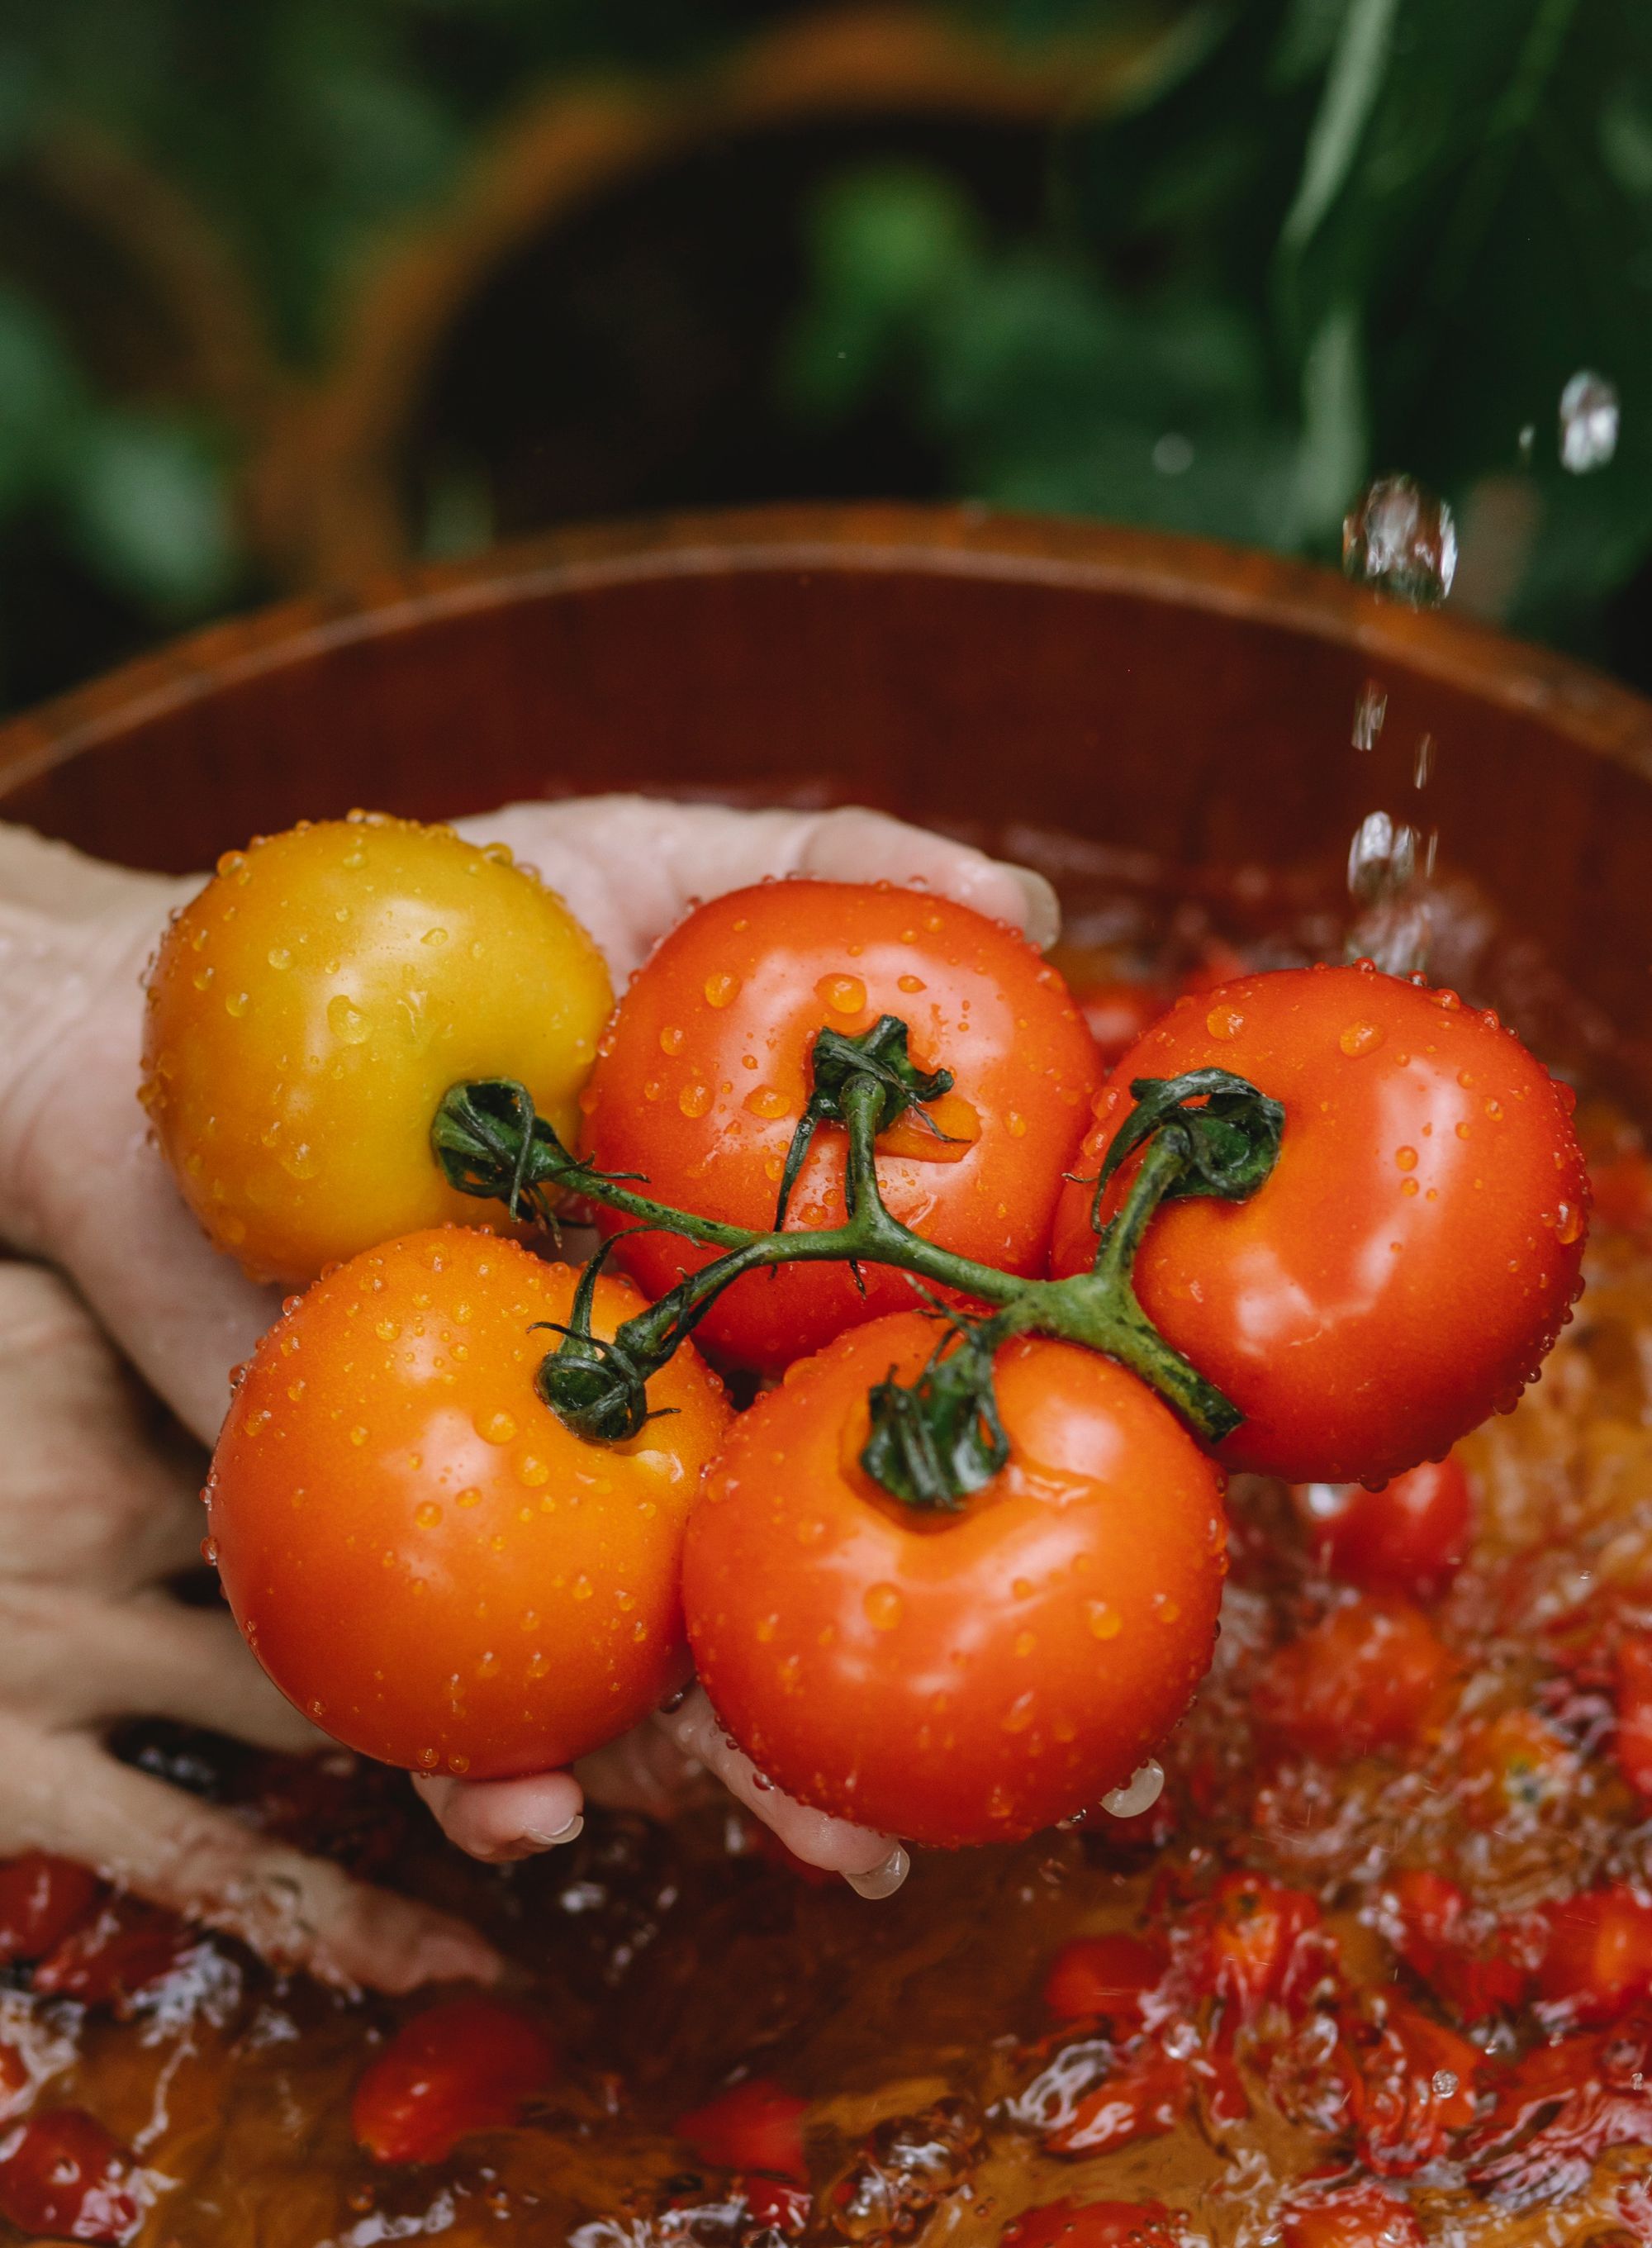 Wash as many tomatoes as you can get your hands on - Any Lane, Pexels